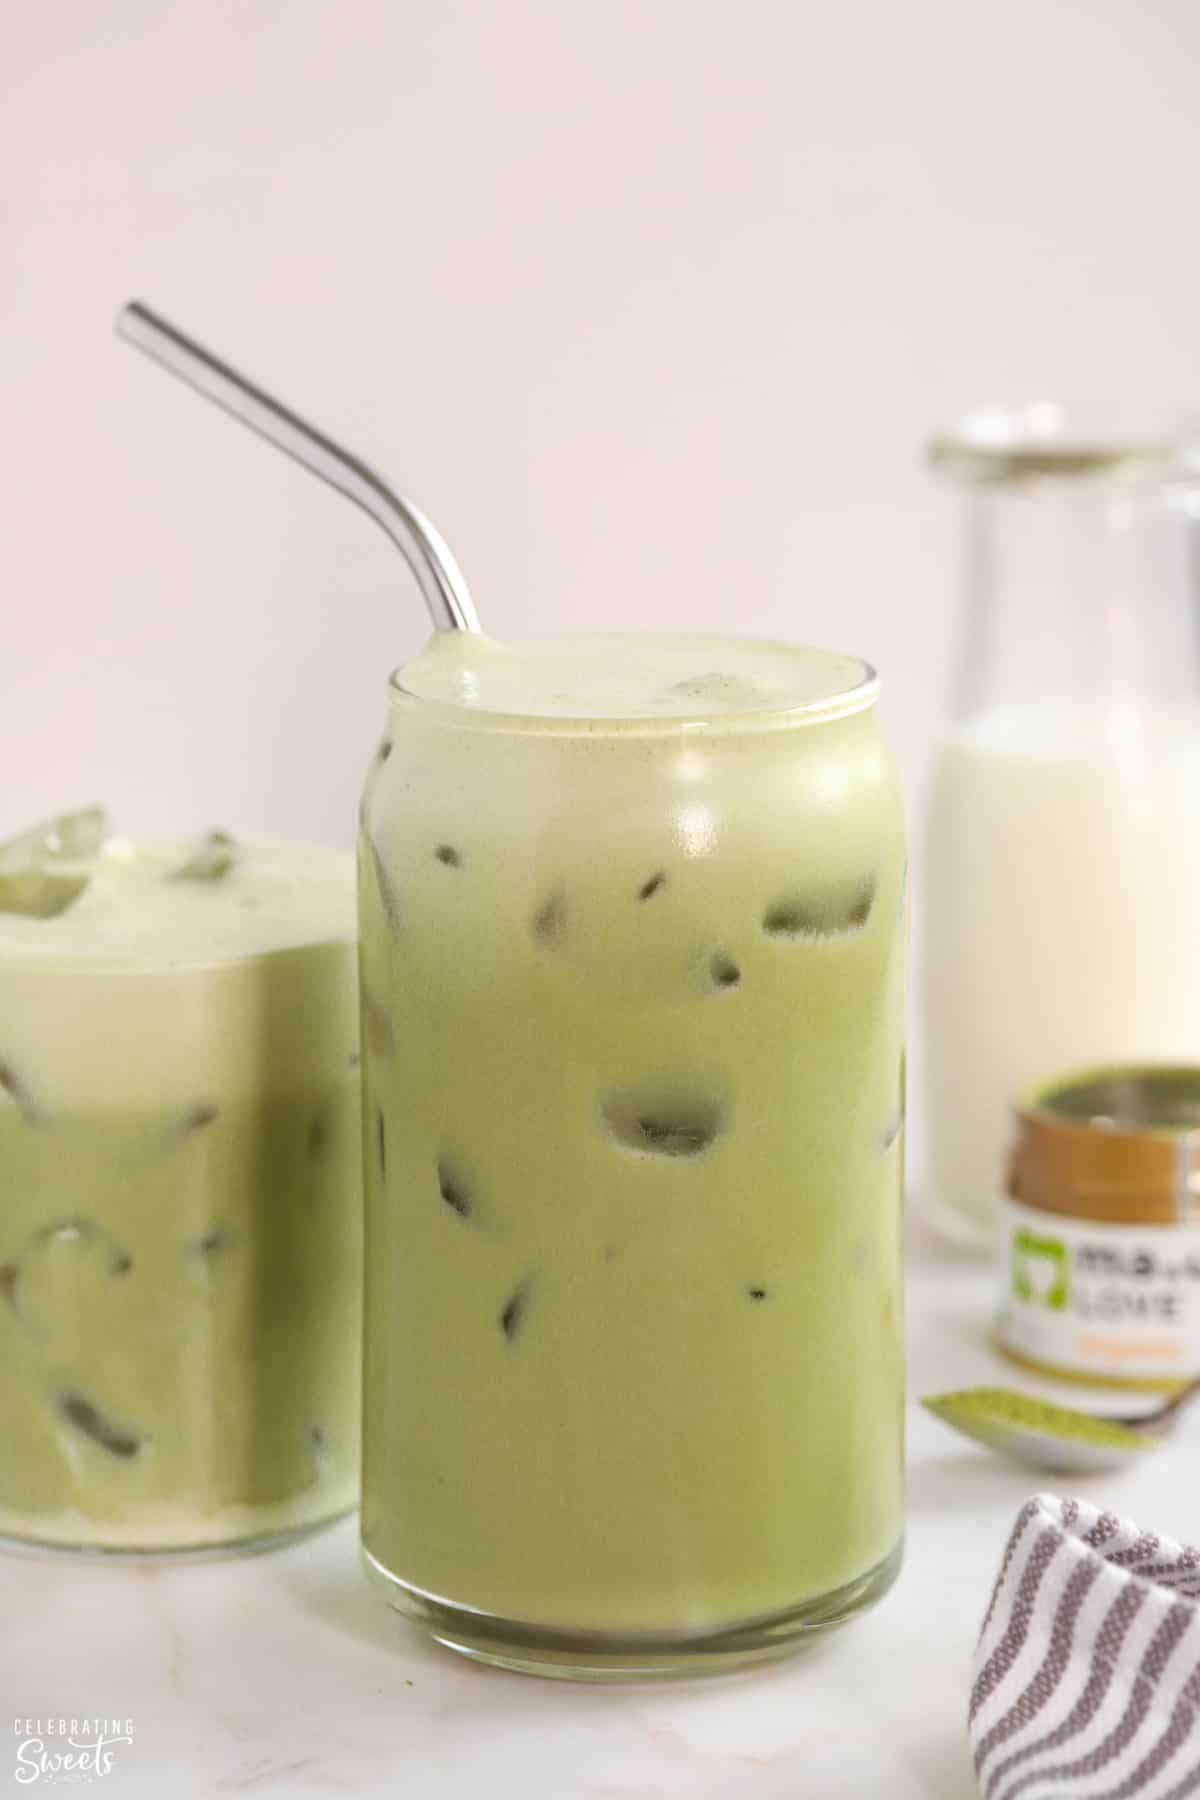 Closeup of an iced matcha latte in a glass with a stainless straw